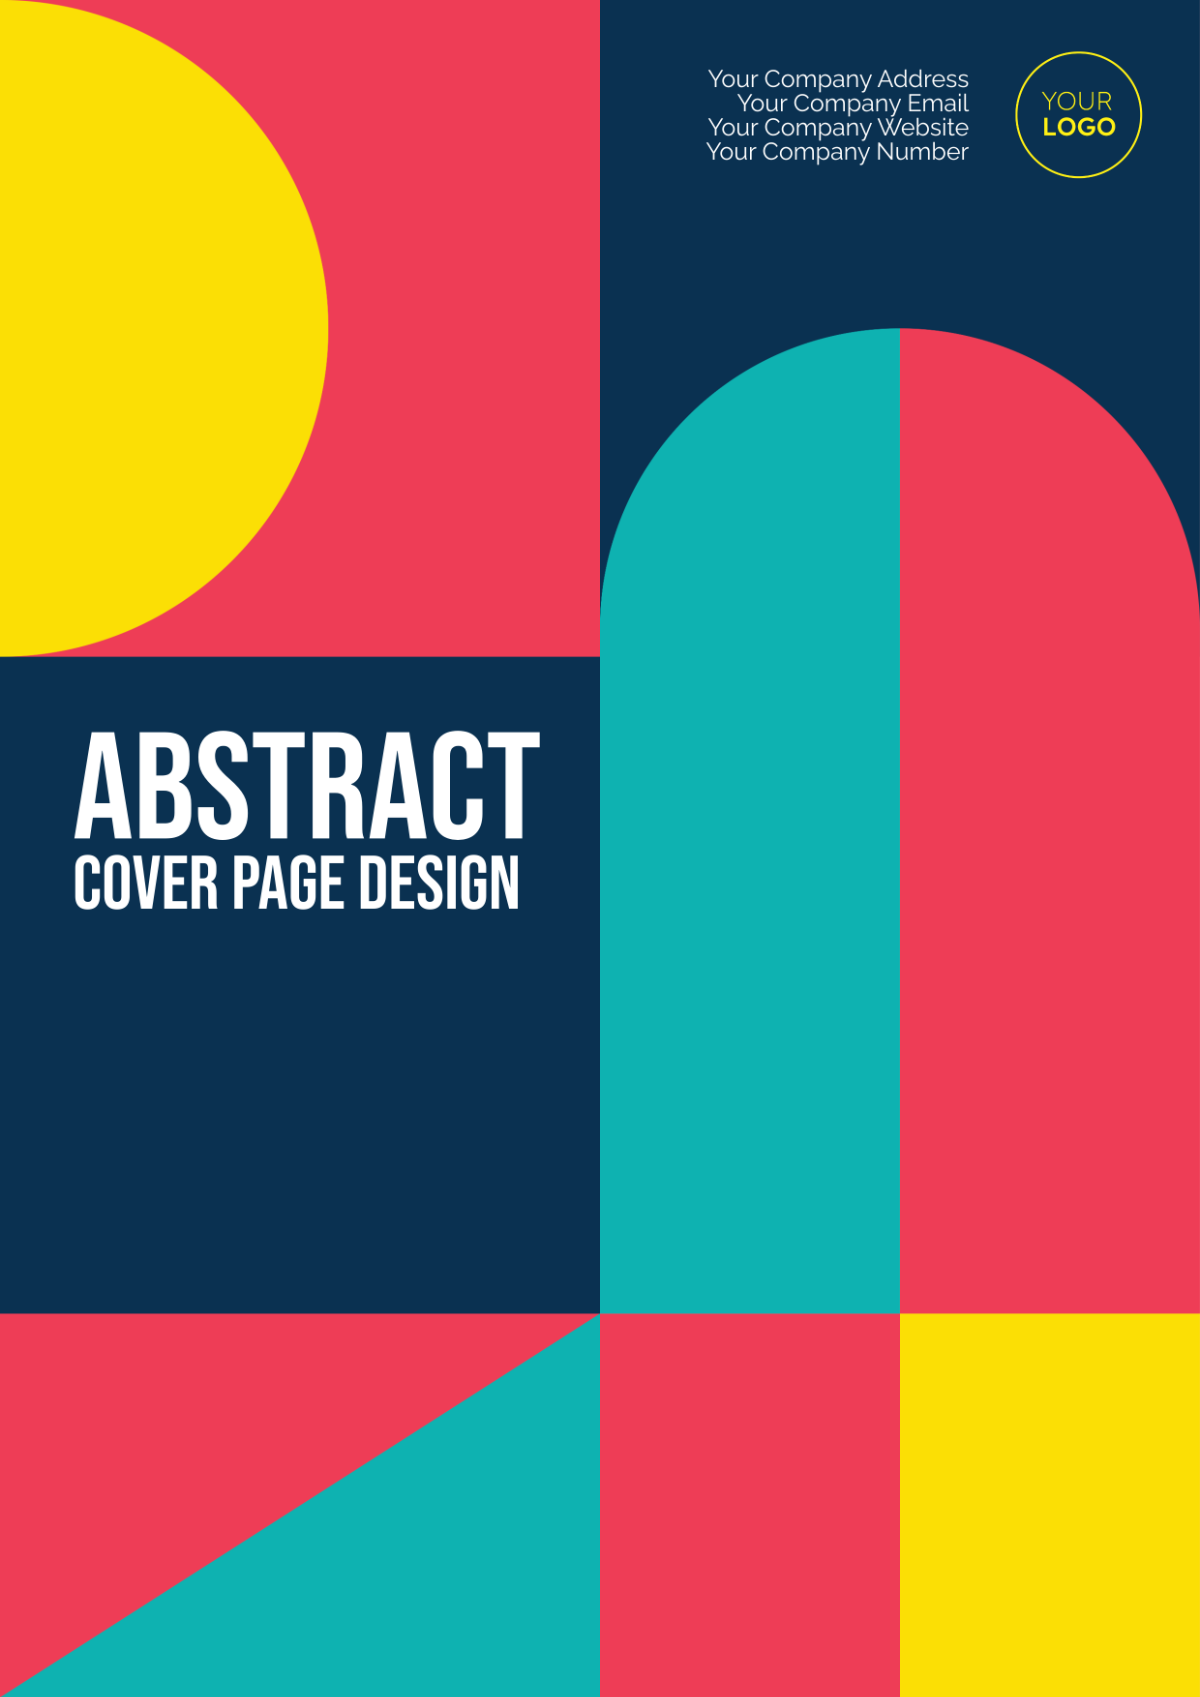 Abstract Cover Page Design